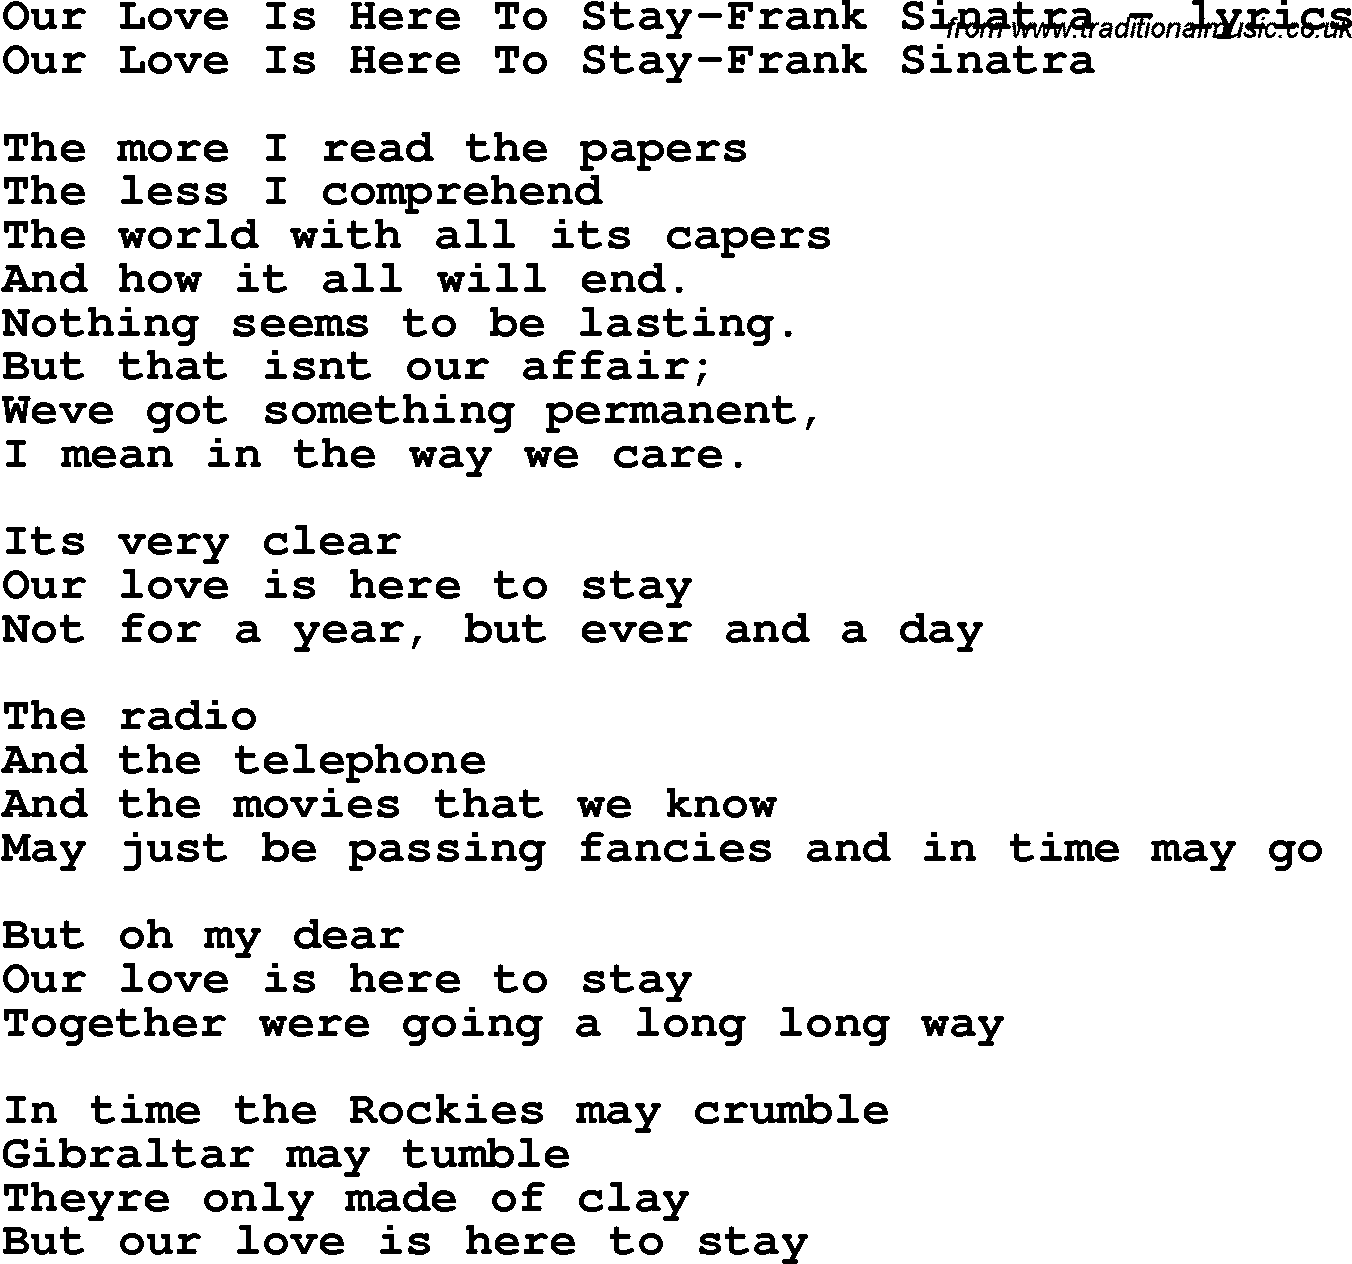 Love Song Lyrics for: Our Love Is Here To Stay-Frank Sinatra